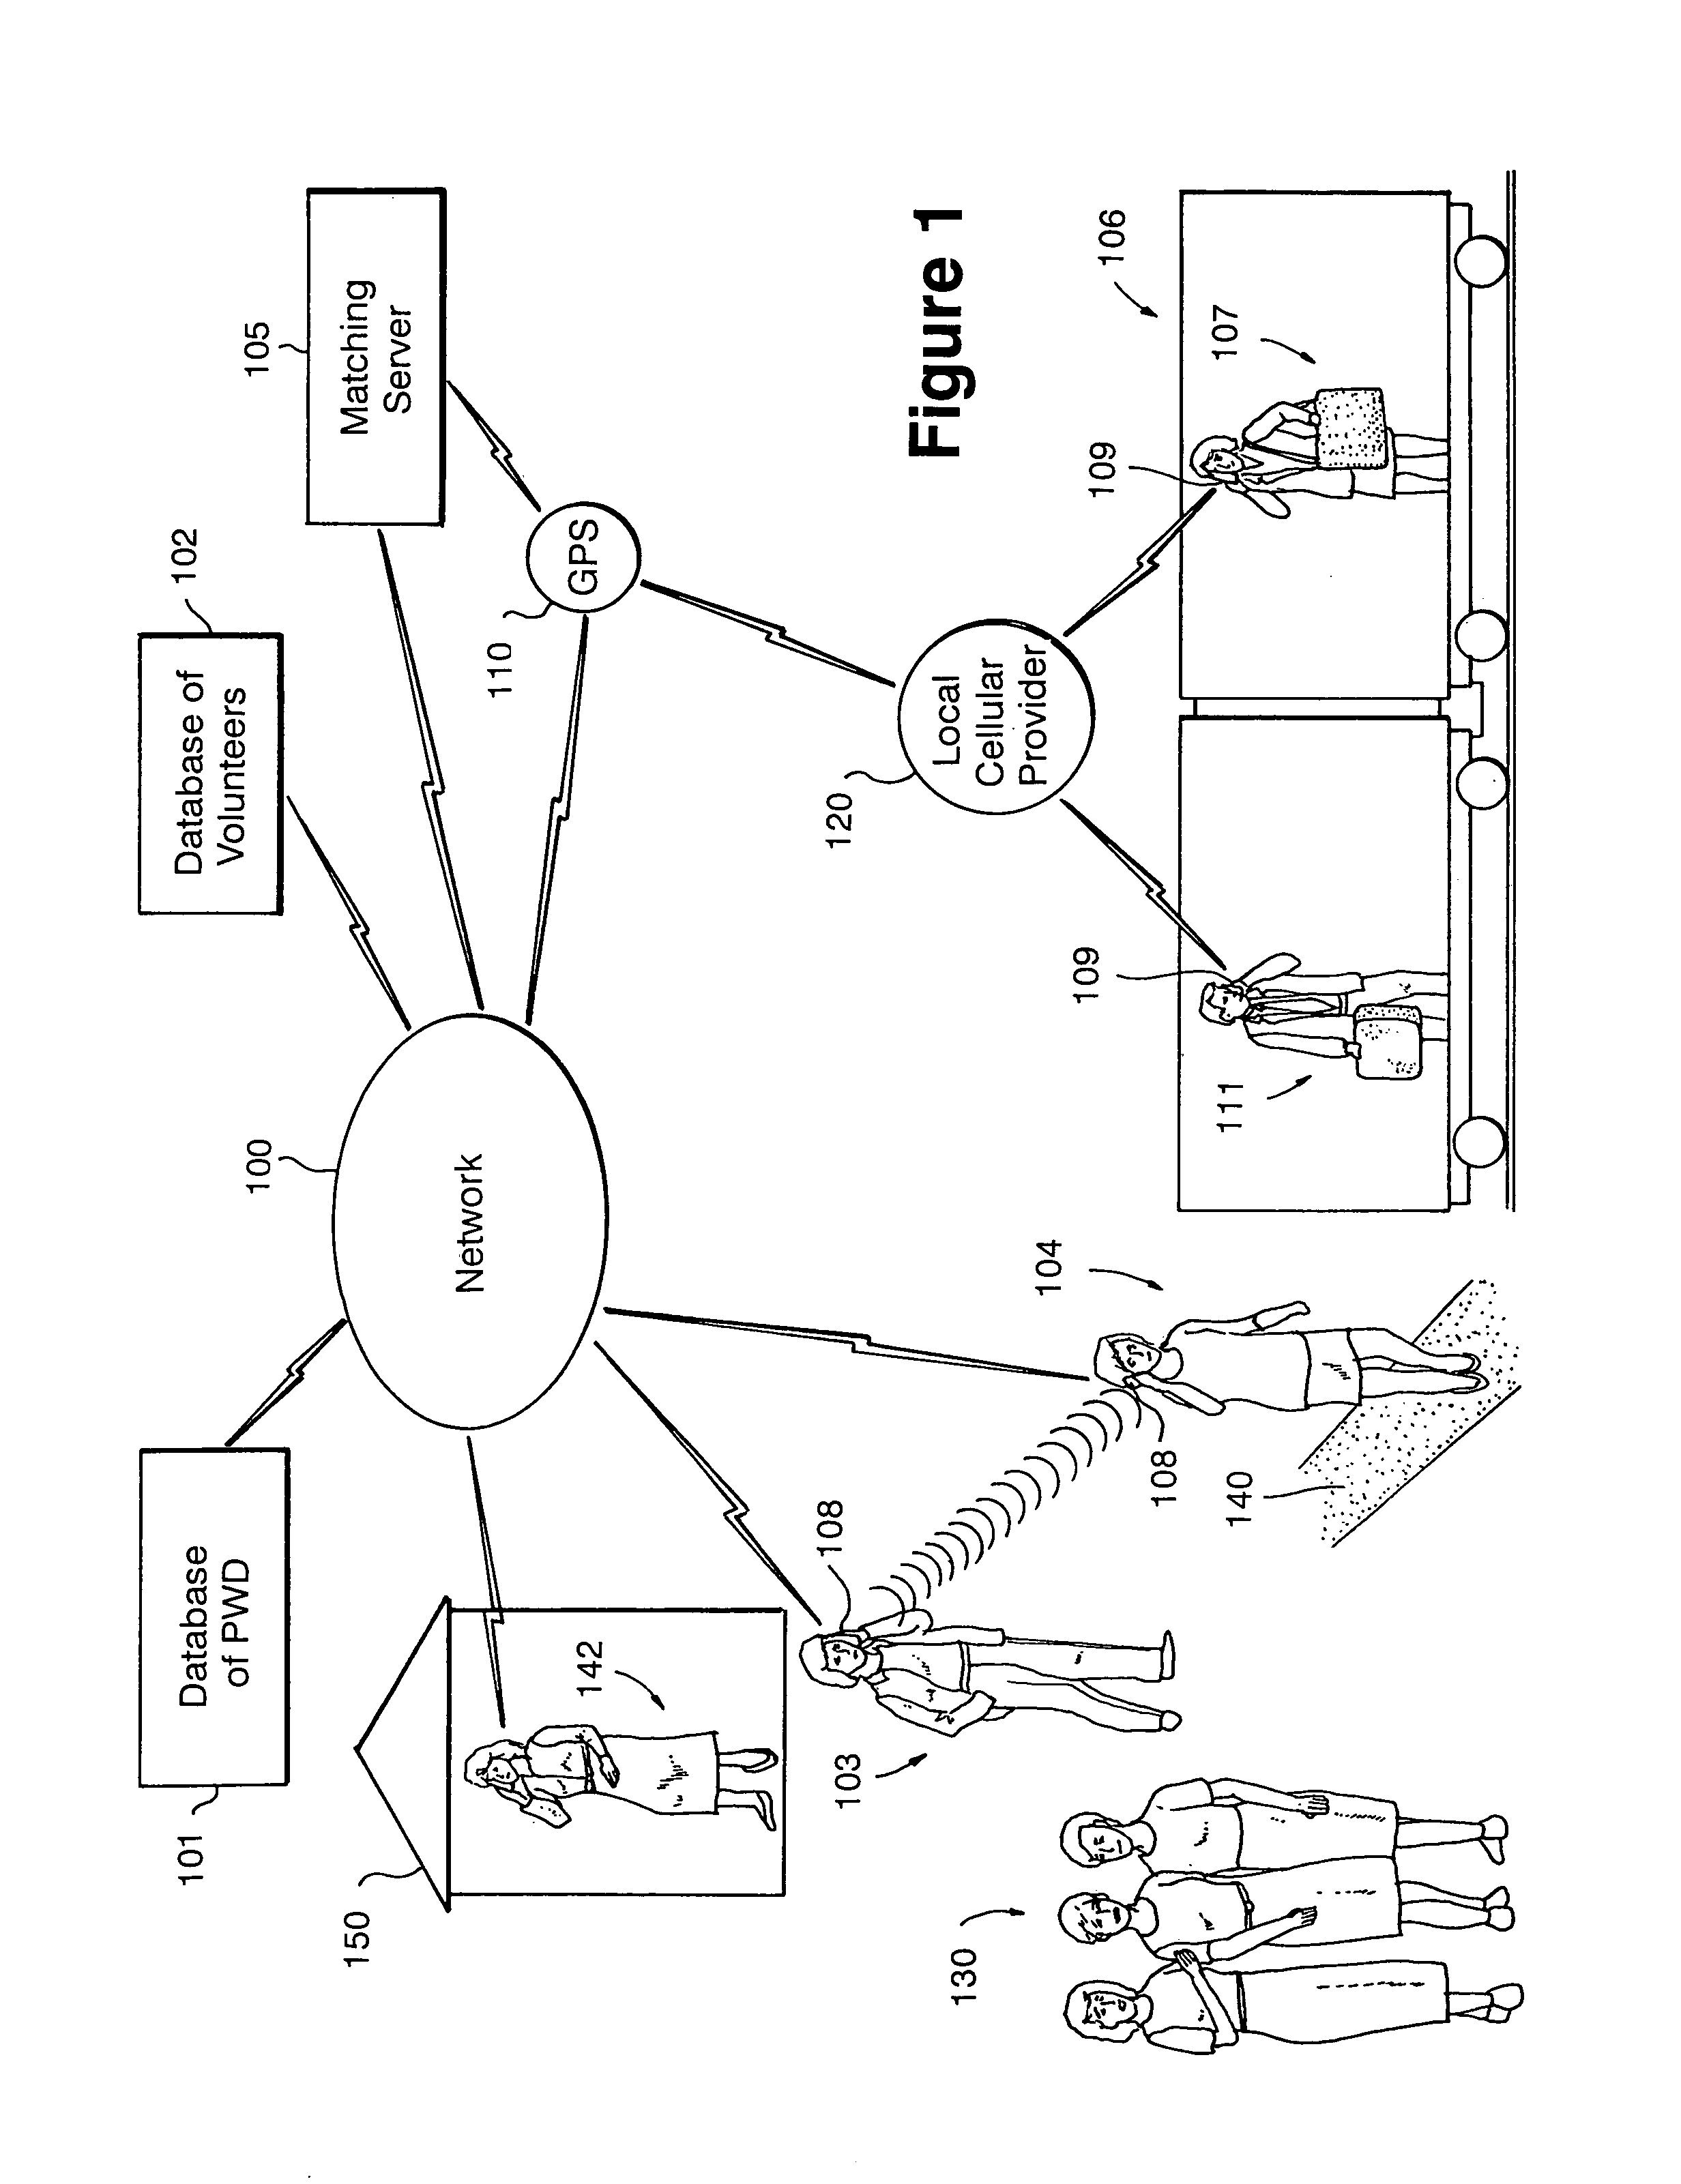 Network of portable, wireless communication devices